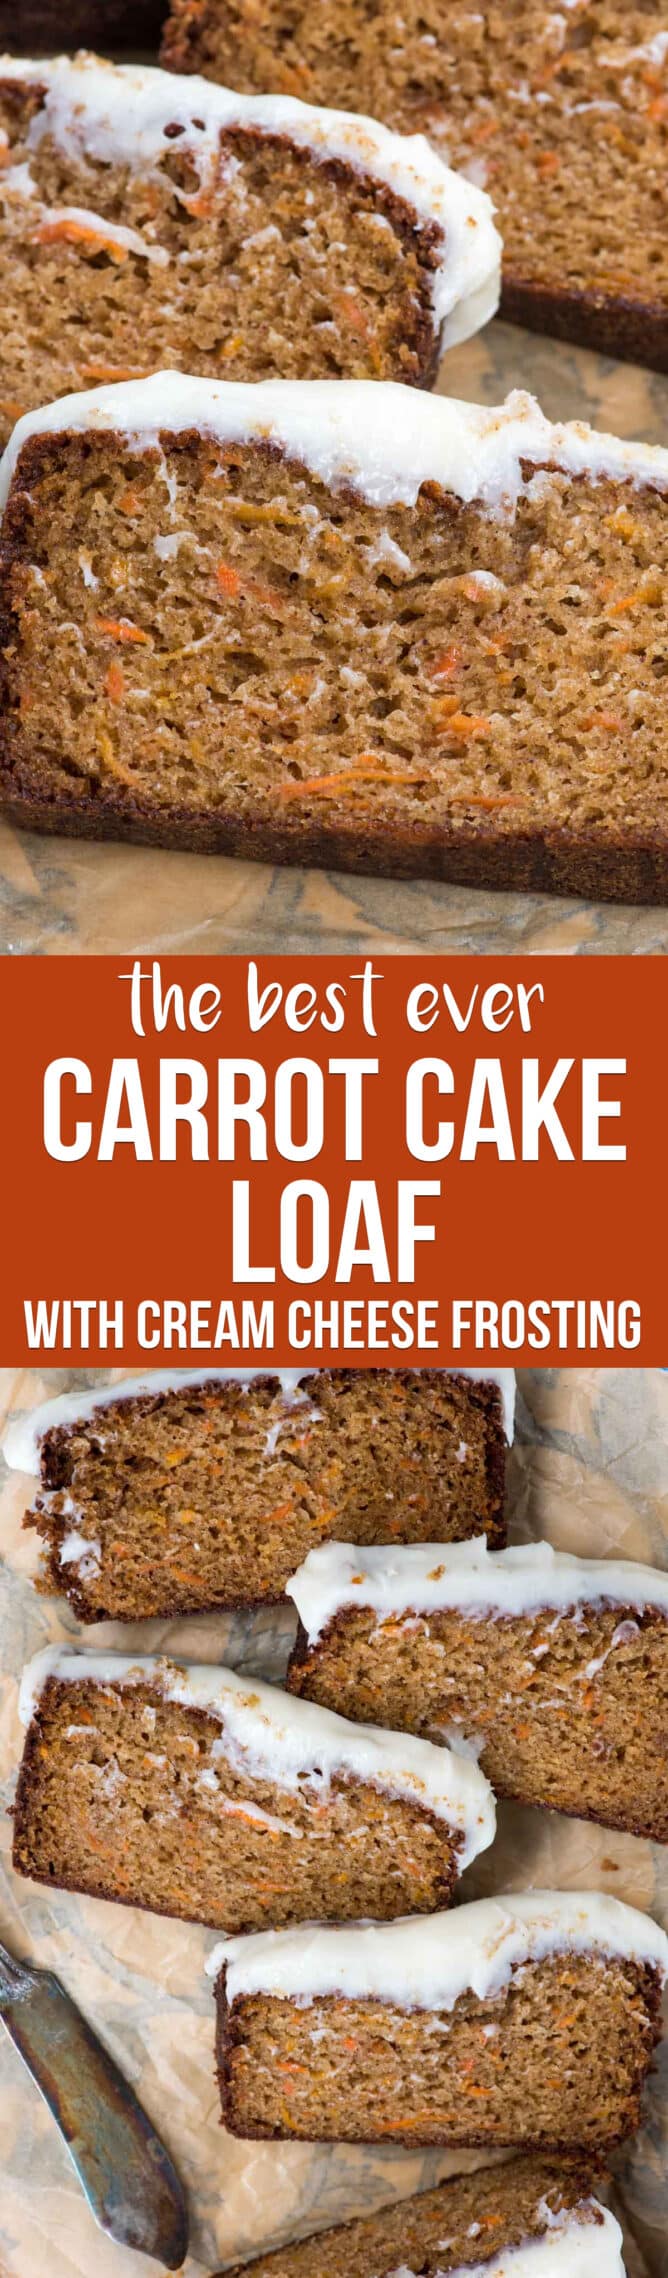 collage of carrot cake loaf photos